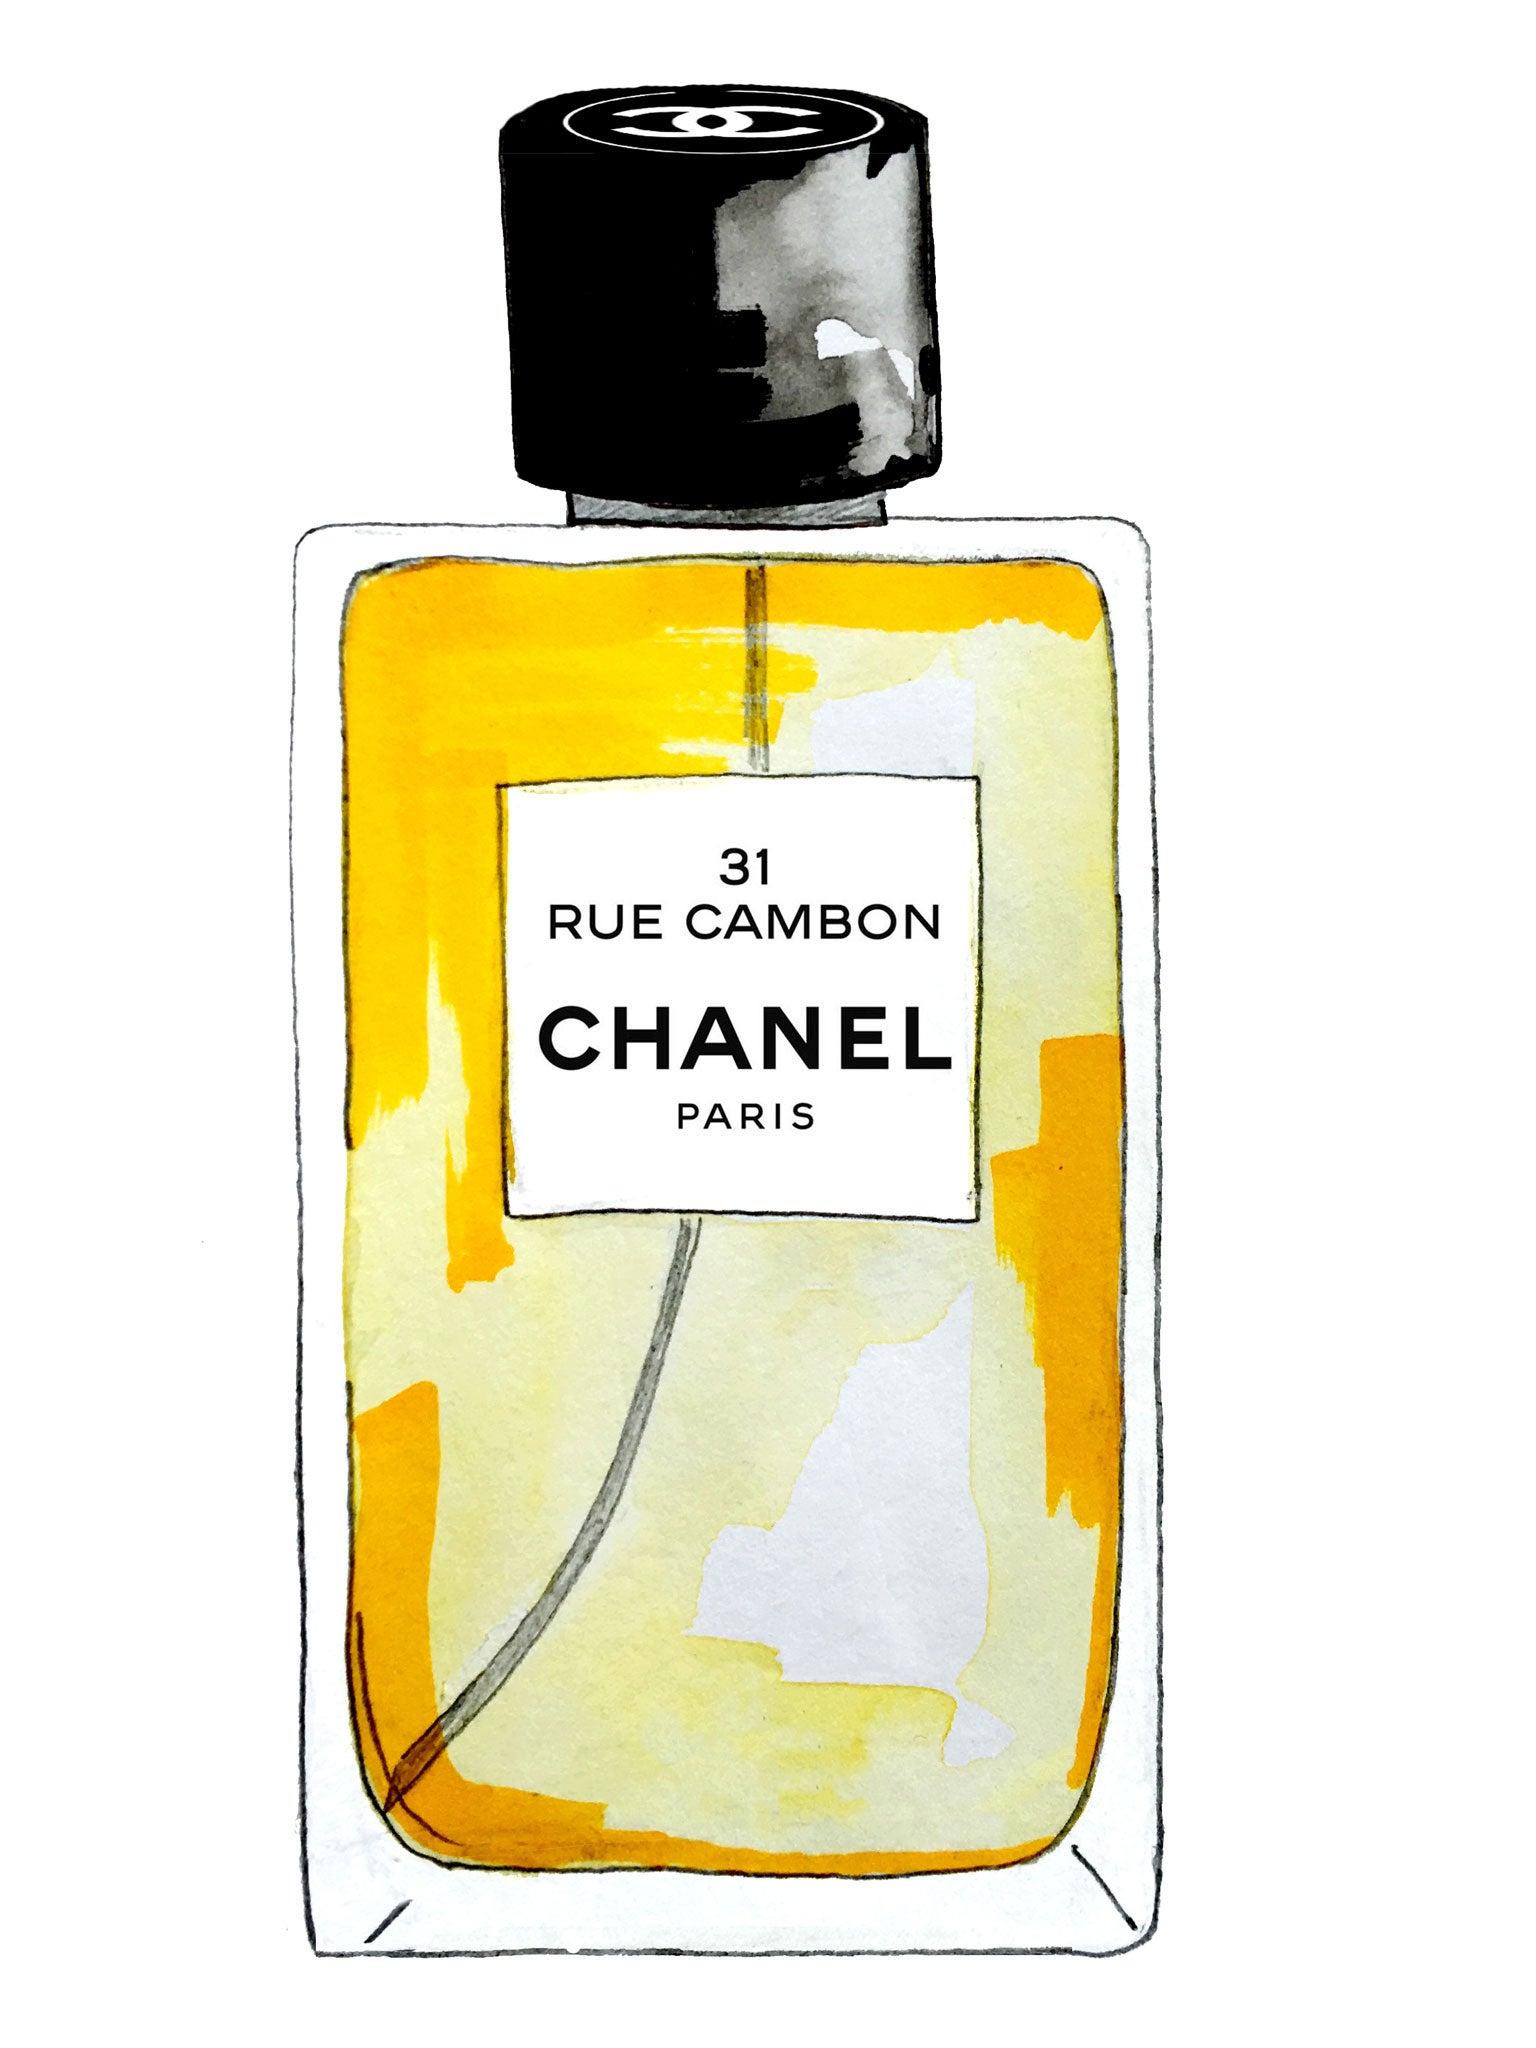 &#13;
Chanel's Les Exclusifs line contains fragrances fomulated for Gabrielle Chanel in the 1920s and 1930s, as well as modern interpretations &#13;